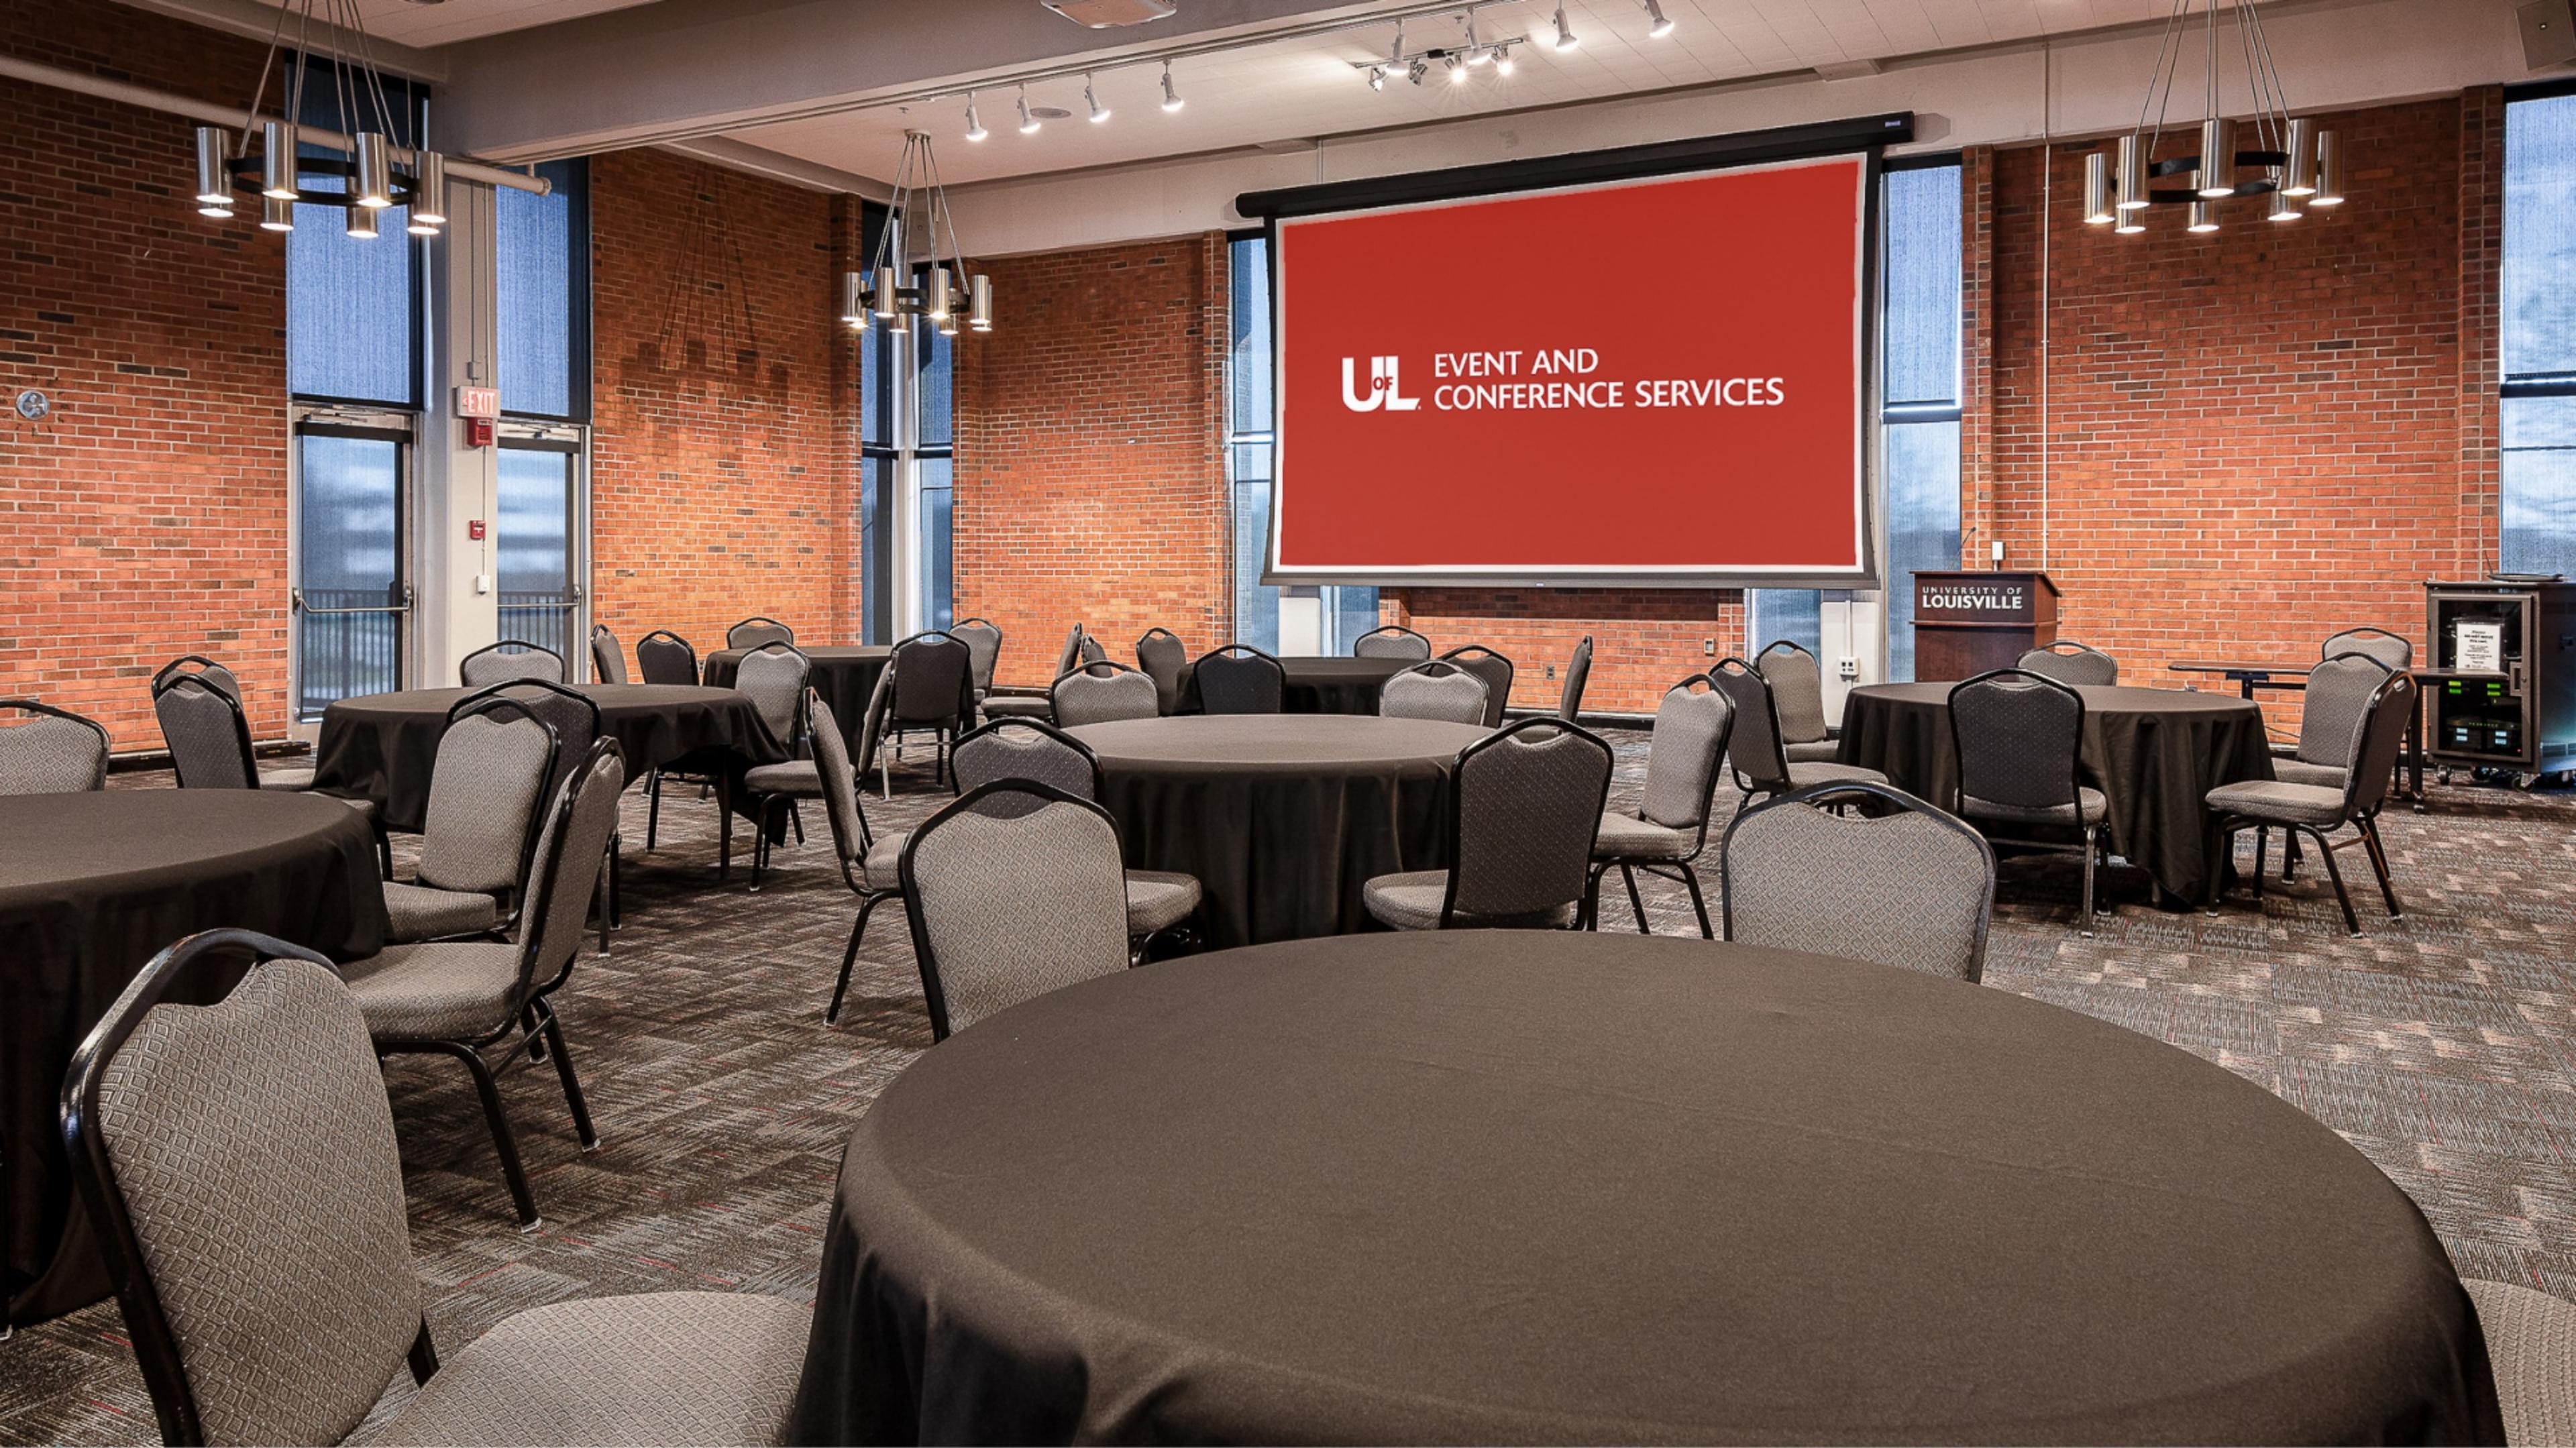 University of Louisville Event and Conference Center at Shelby Campus